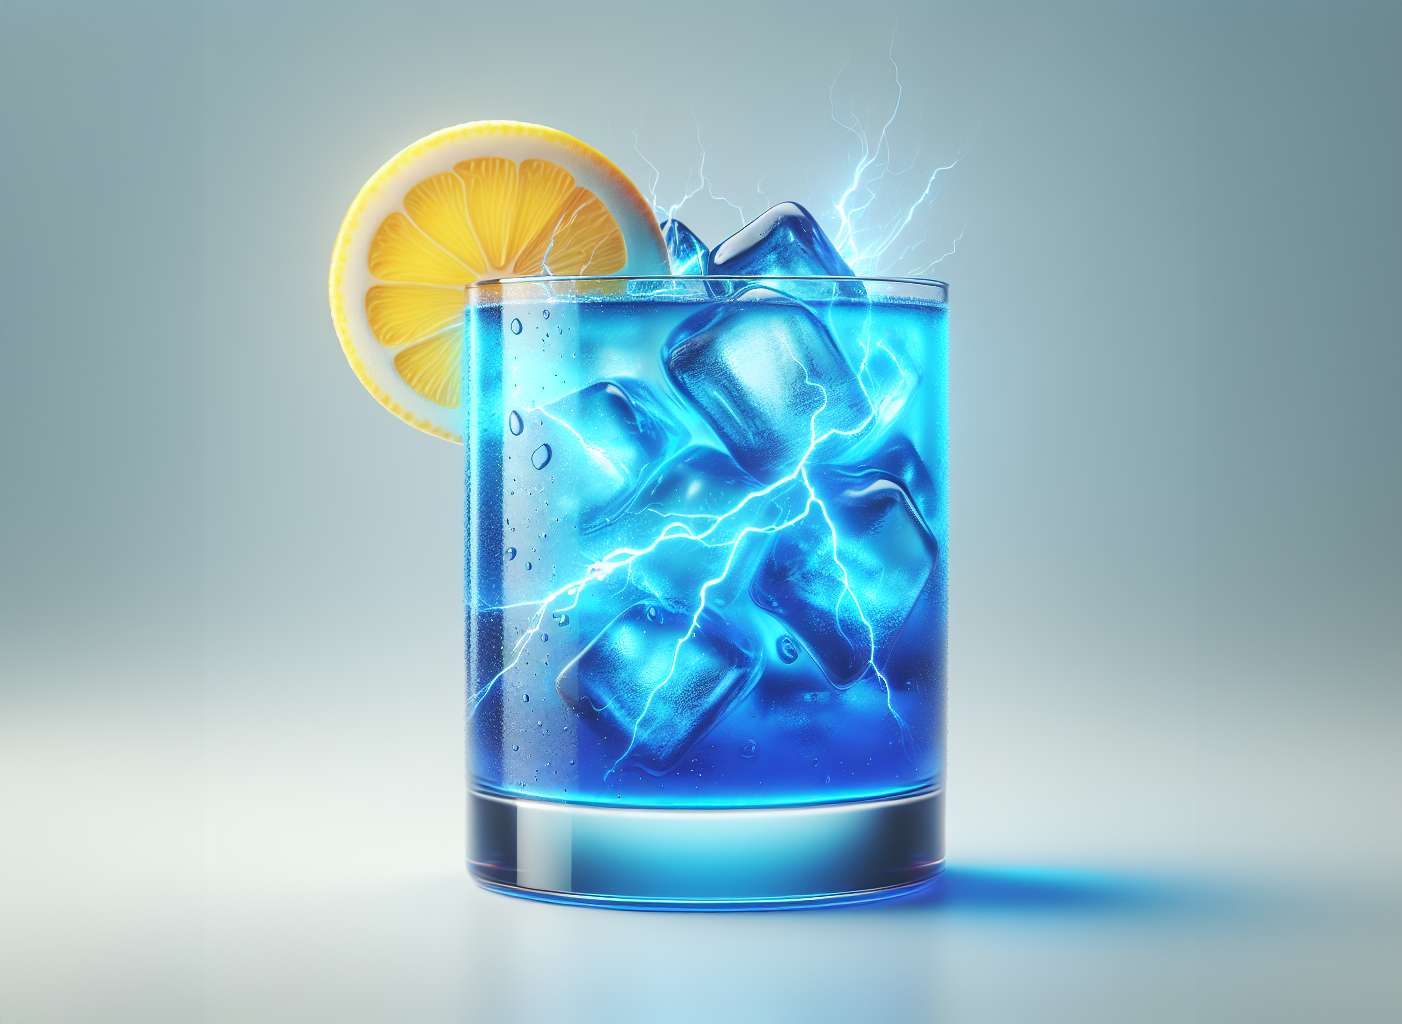 A glass with blue liquid and ice, topped with a lemon slice and whimsical lightning bolts.